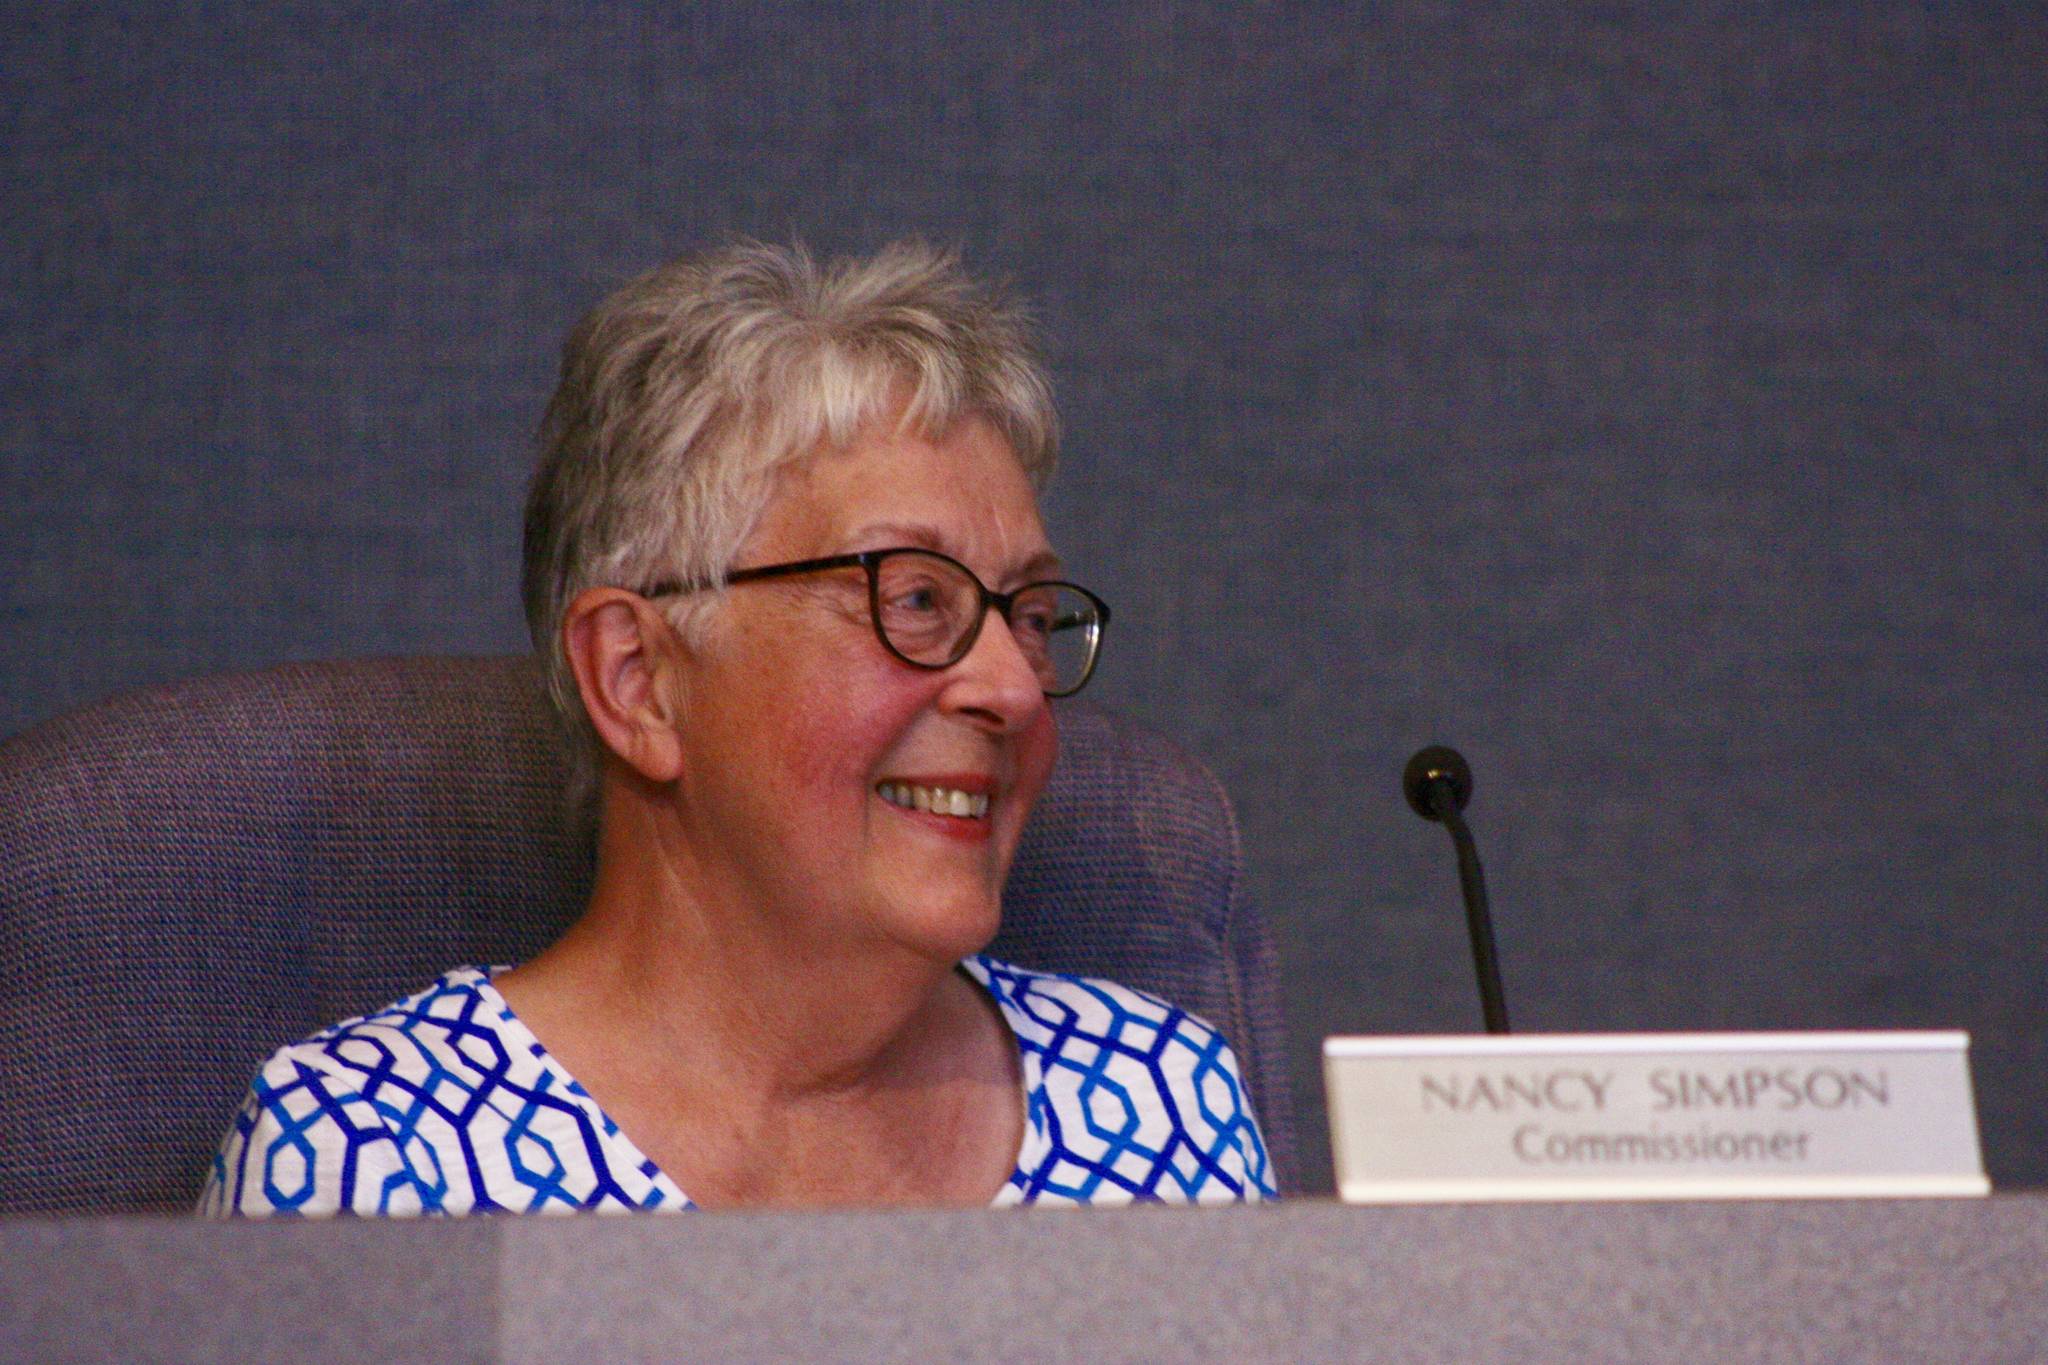 King County Landmarks Commissioner Nancy Simpson smiles after the panel granted the city of Kent historic landmark designation for three Apollo lunar rovers during a public hearing at Kent City Hall on Thursday. The rovers were manufactured at Boeing’s Space Center in Kent during the Apollo program era. MARK KLAAS, Kent Reporter